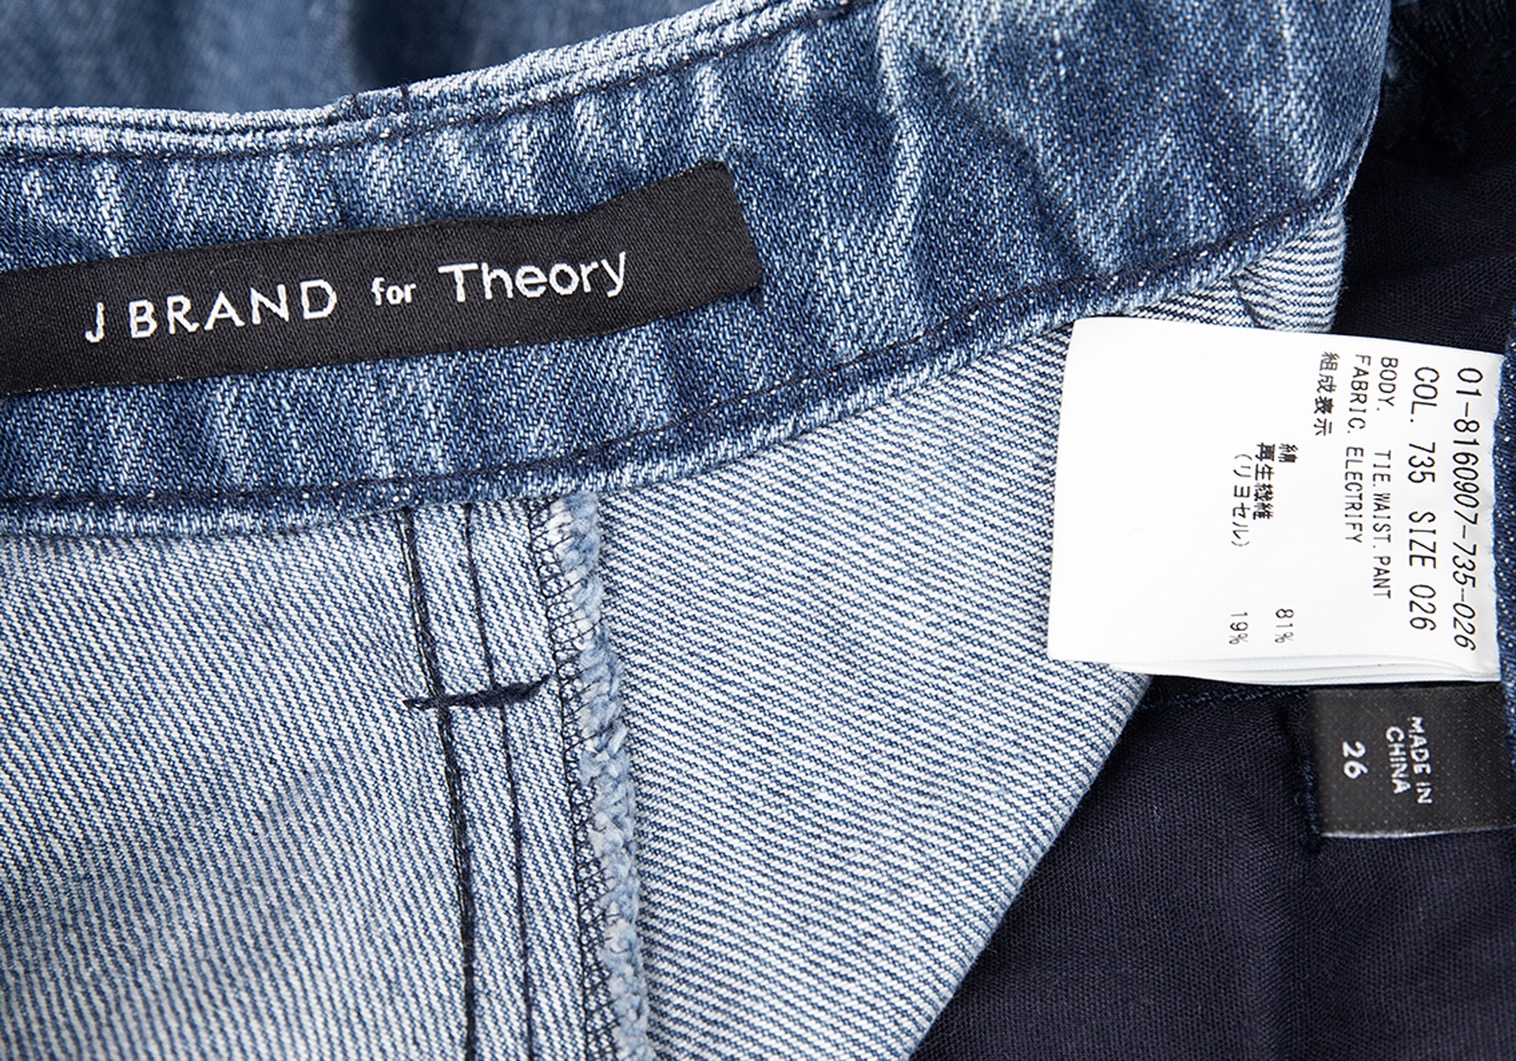 JBRAND for Theory